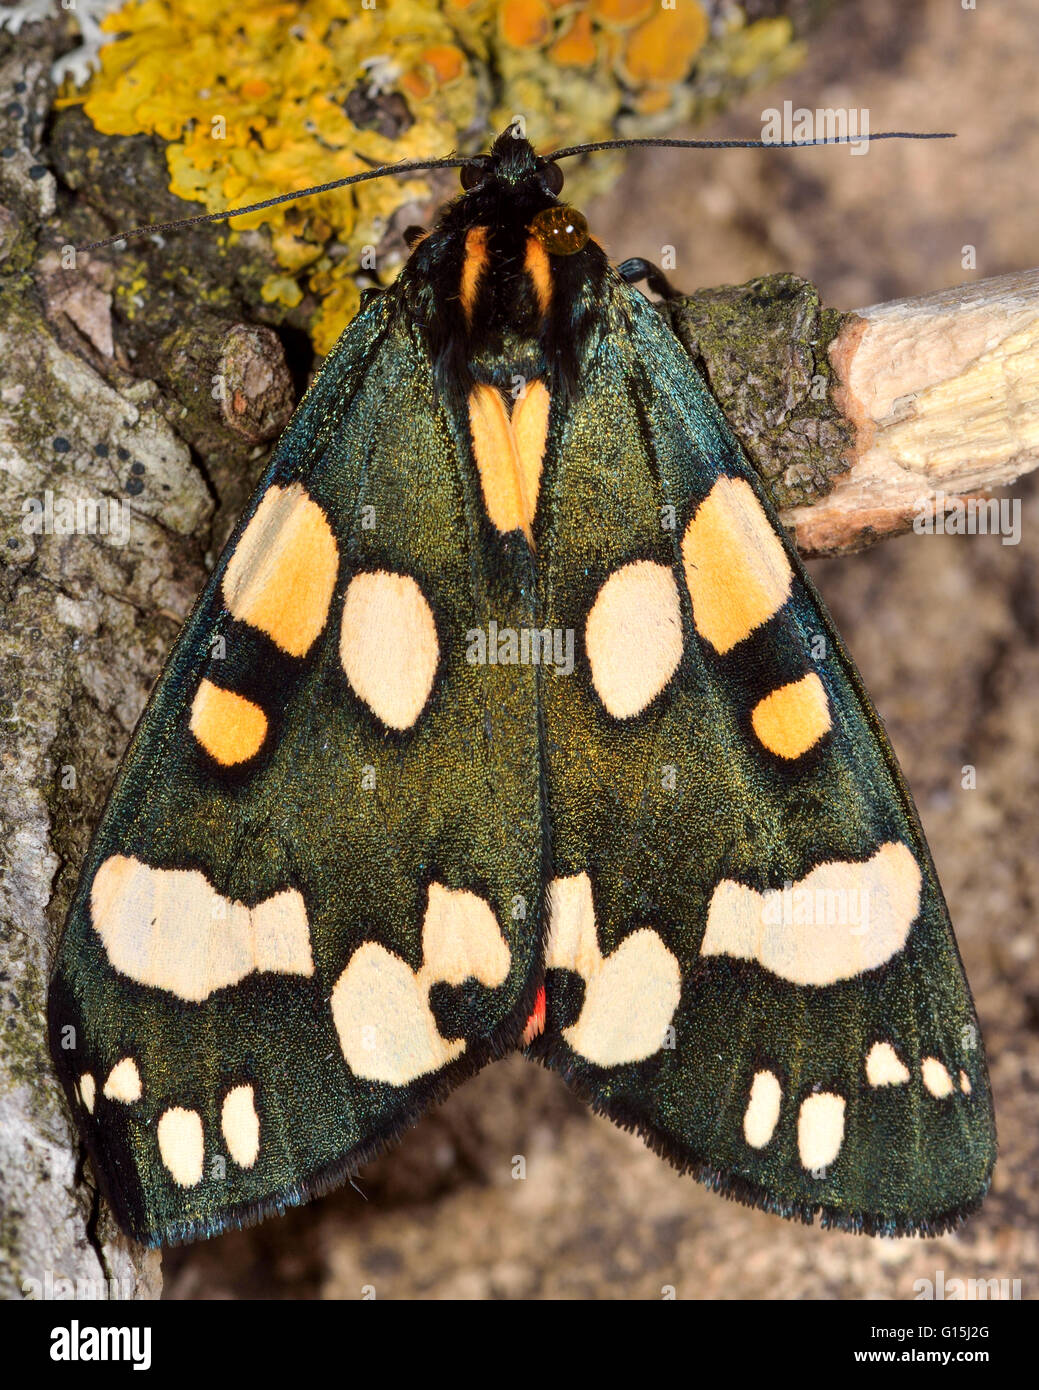 Scarlet tiger moth (Callimorpha dominula). Brightly colored British insect in the family Erebidae, previously Arctiidae, at rest Stock Photo